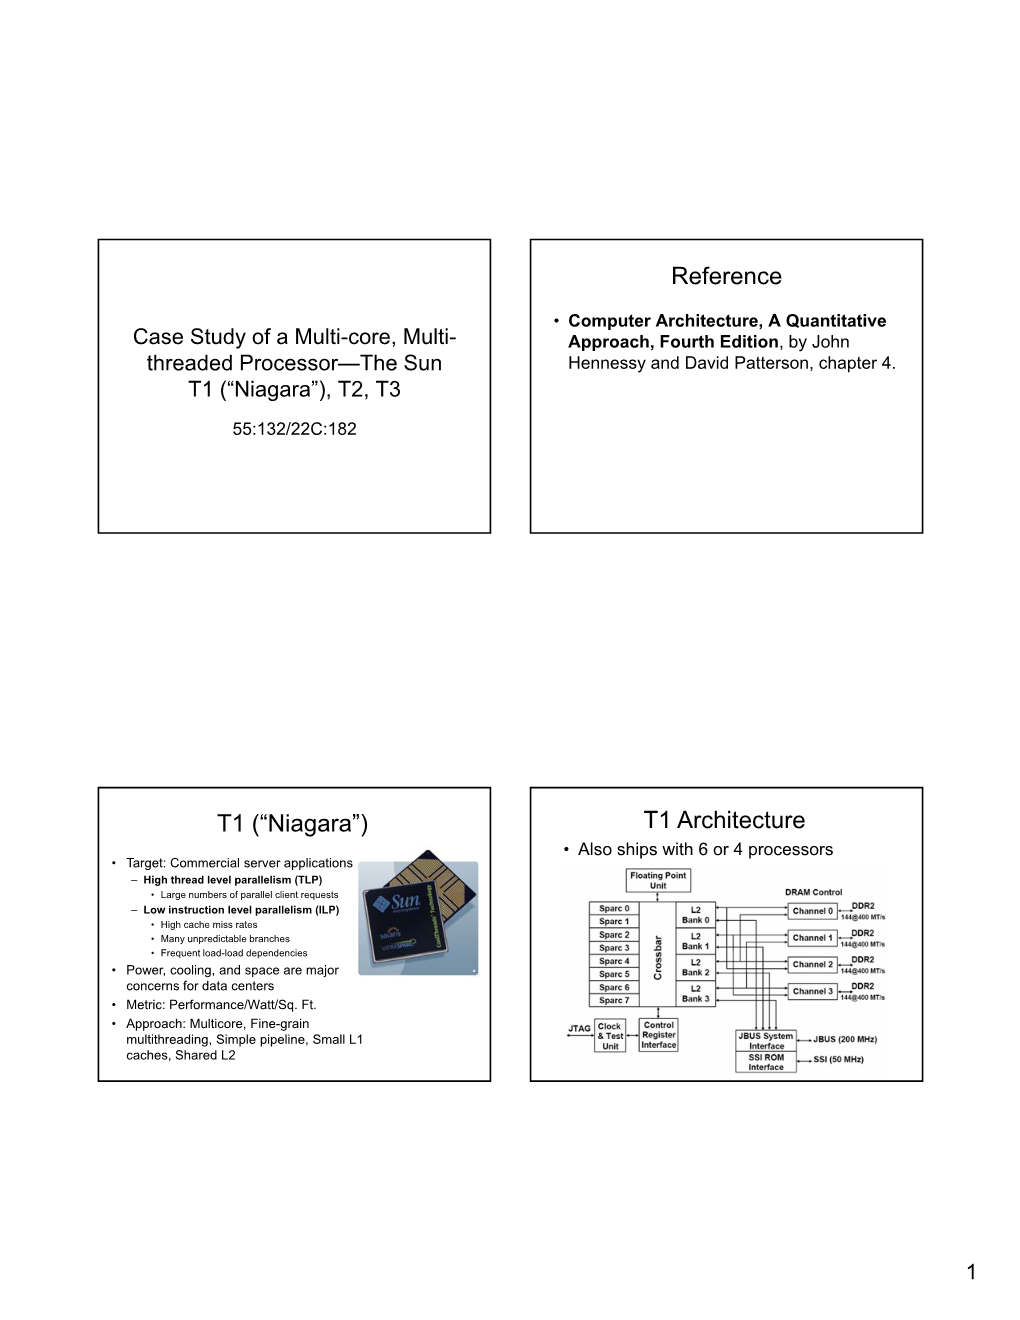 Reference T1 (“Niagara”) T1 Architecture